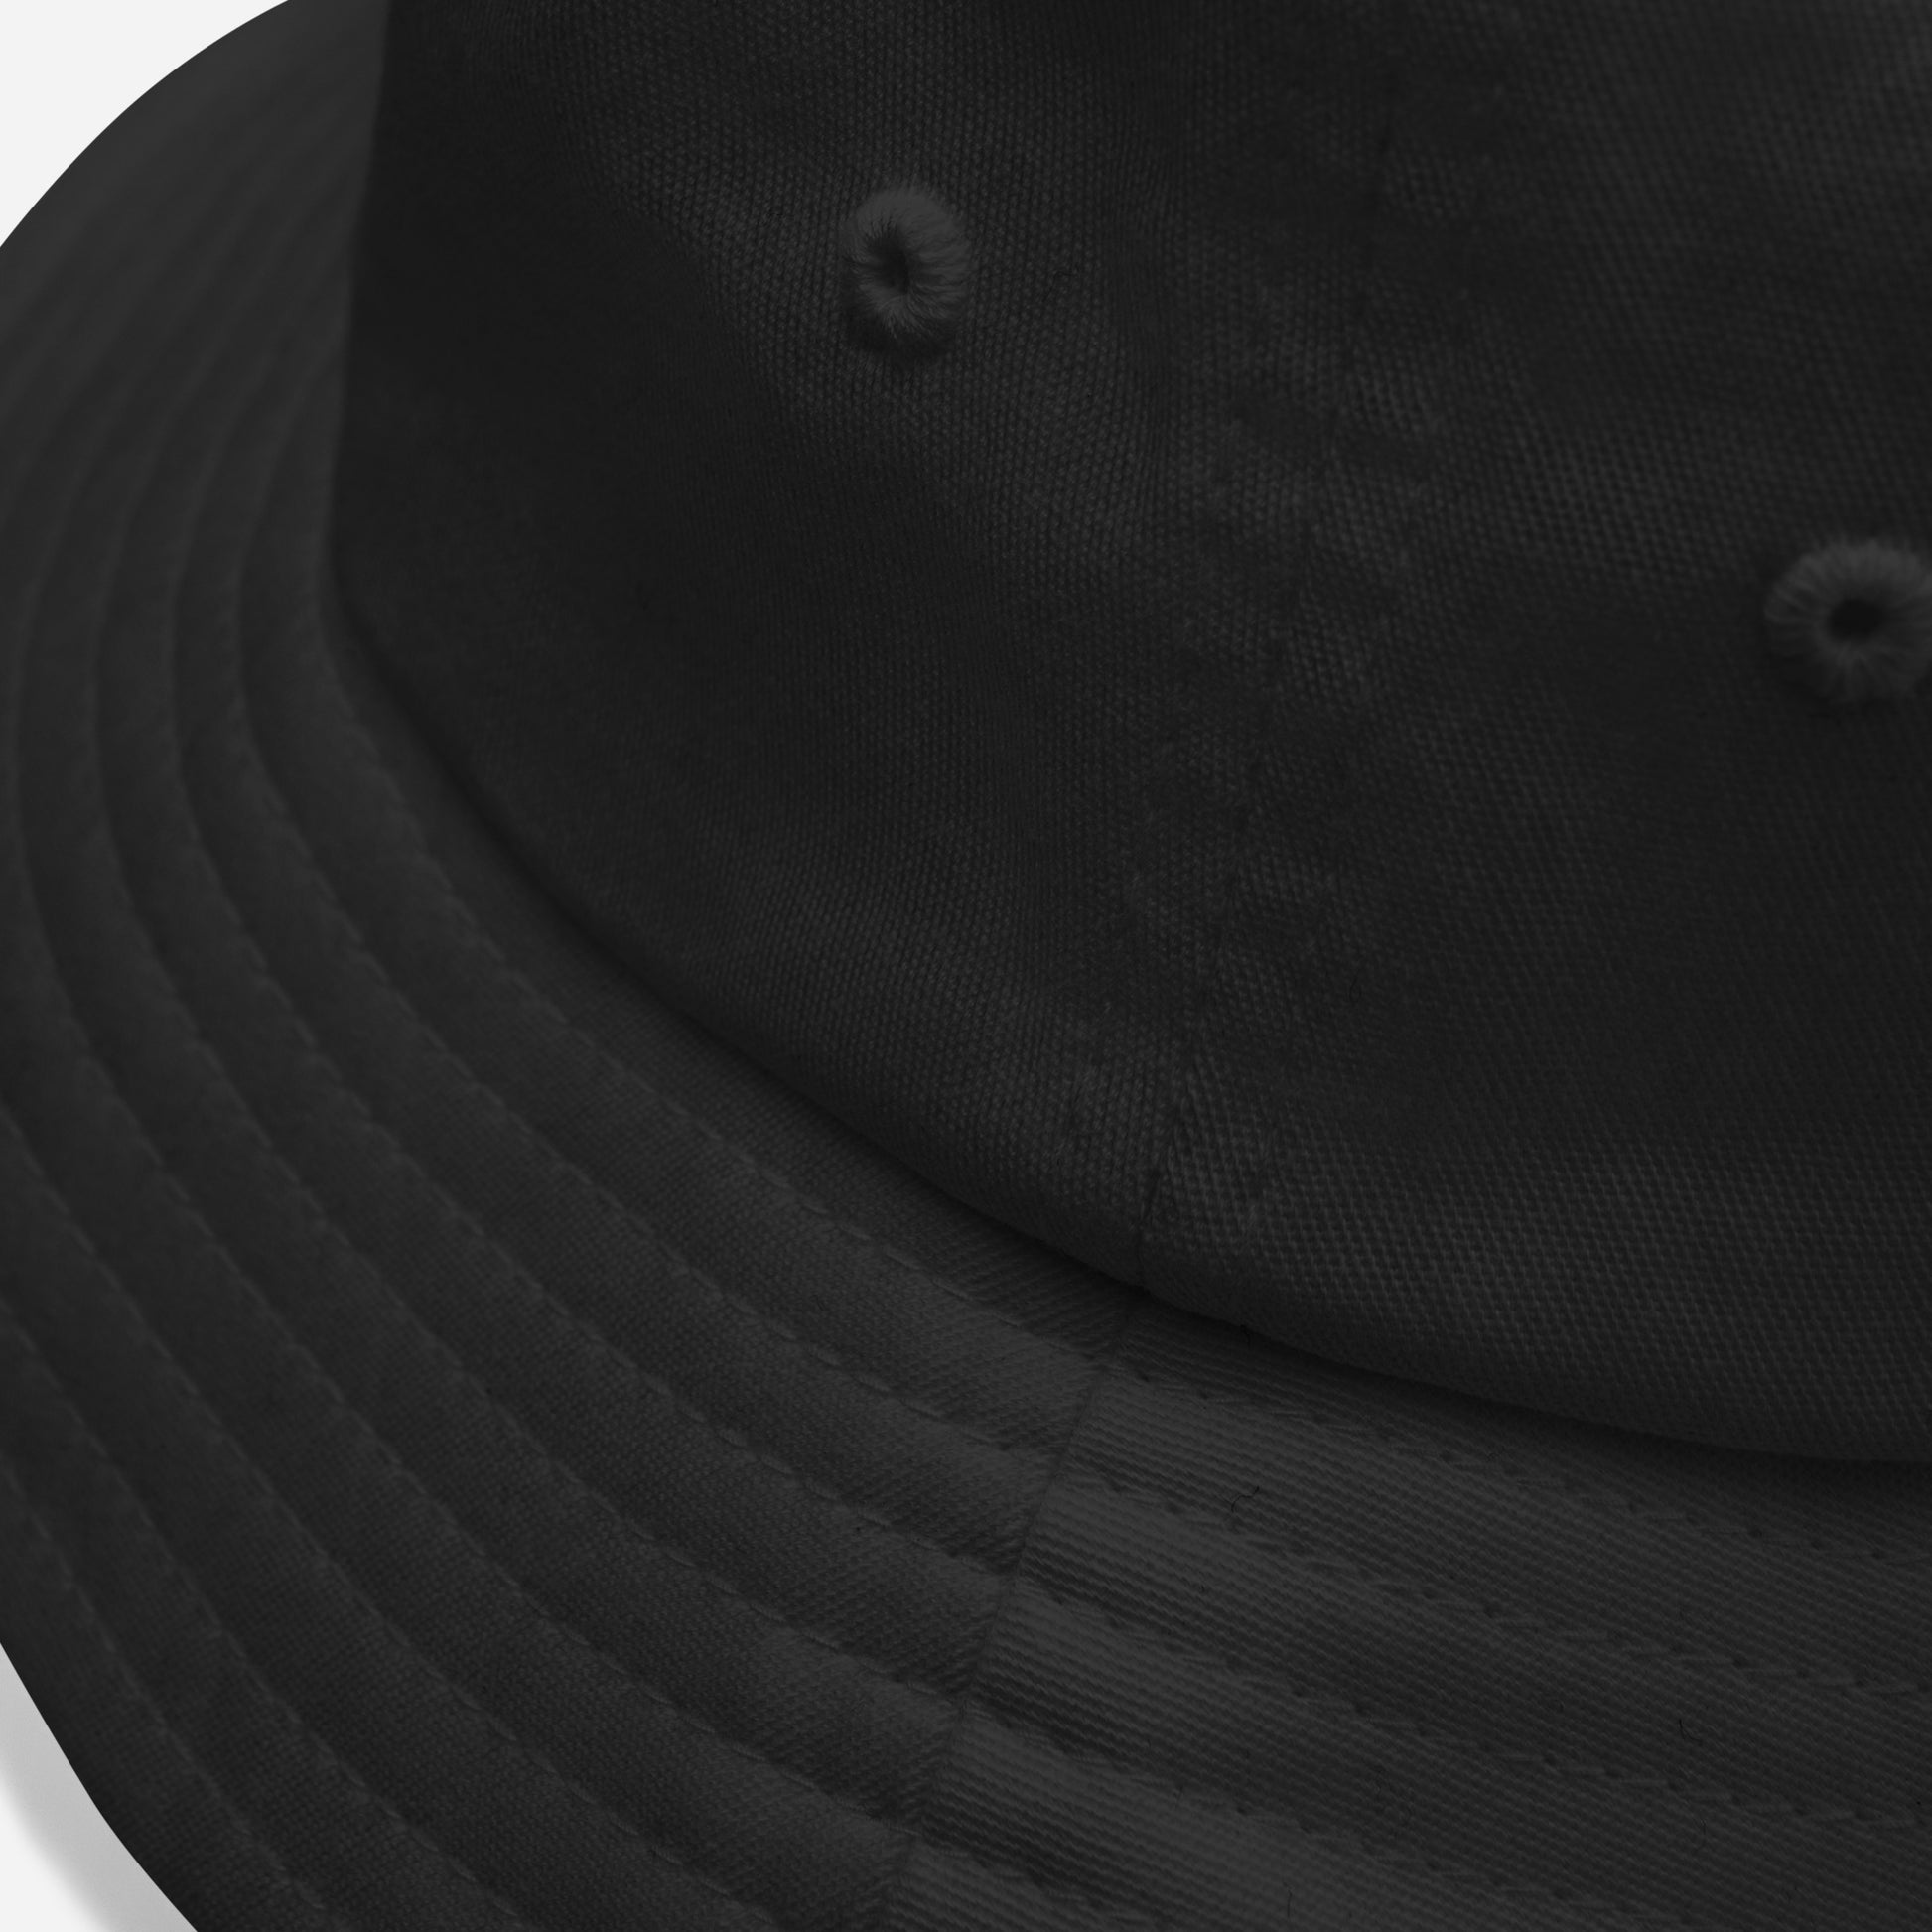 detail of bob bucket hat black b.dfrnt by b.different clothing independent streetwear inspired by street art graffiti